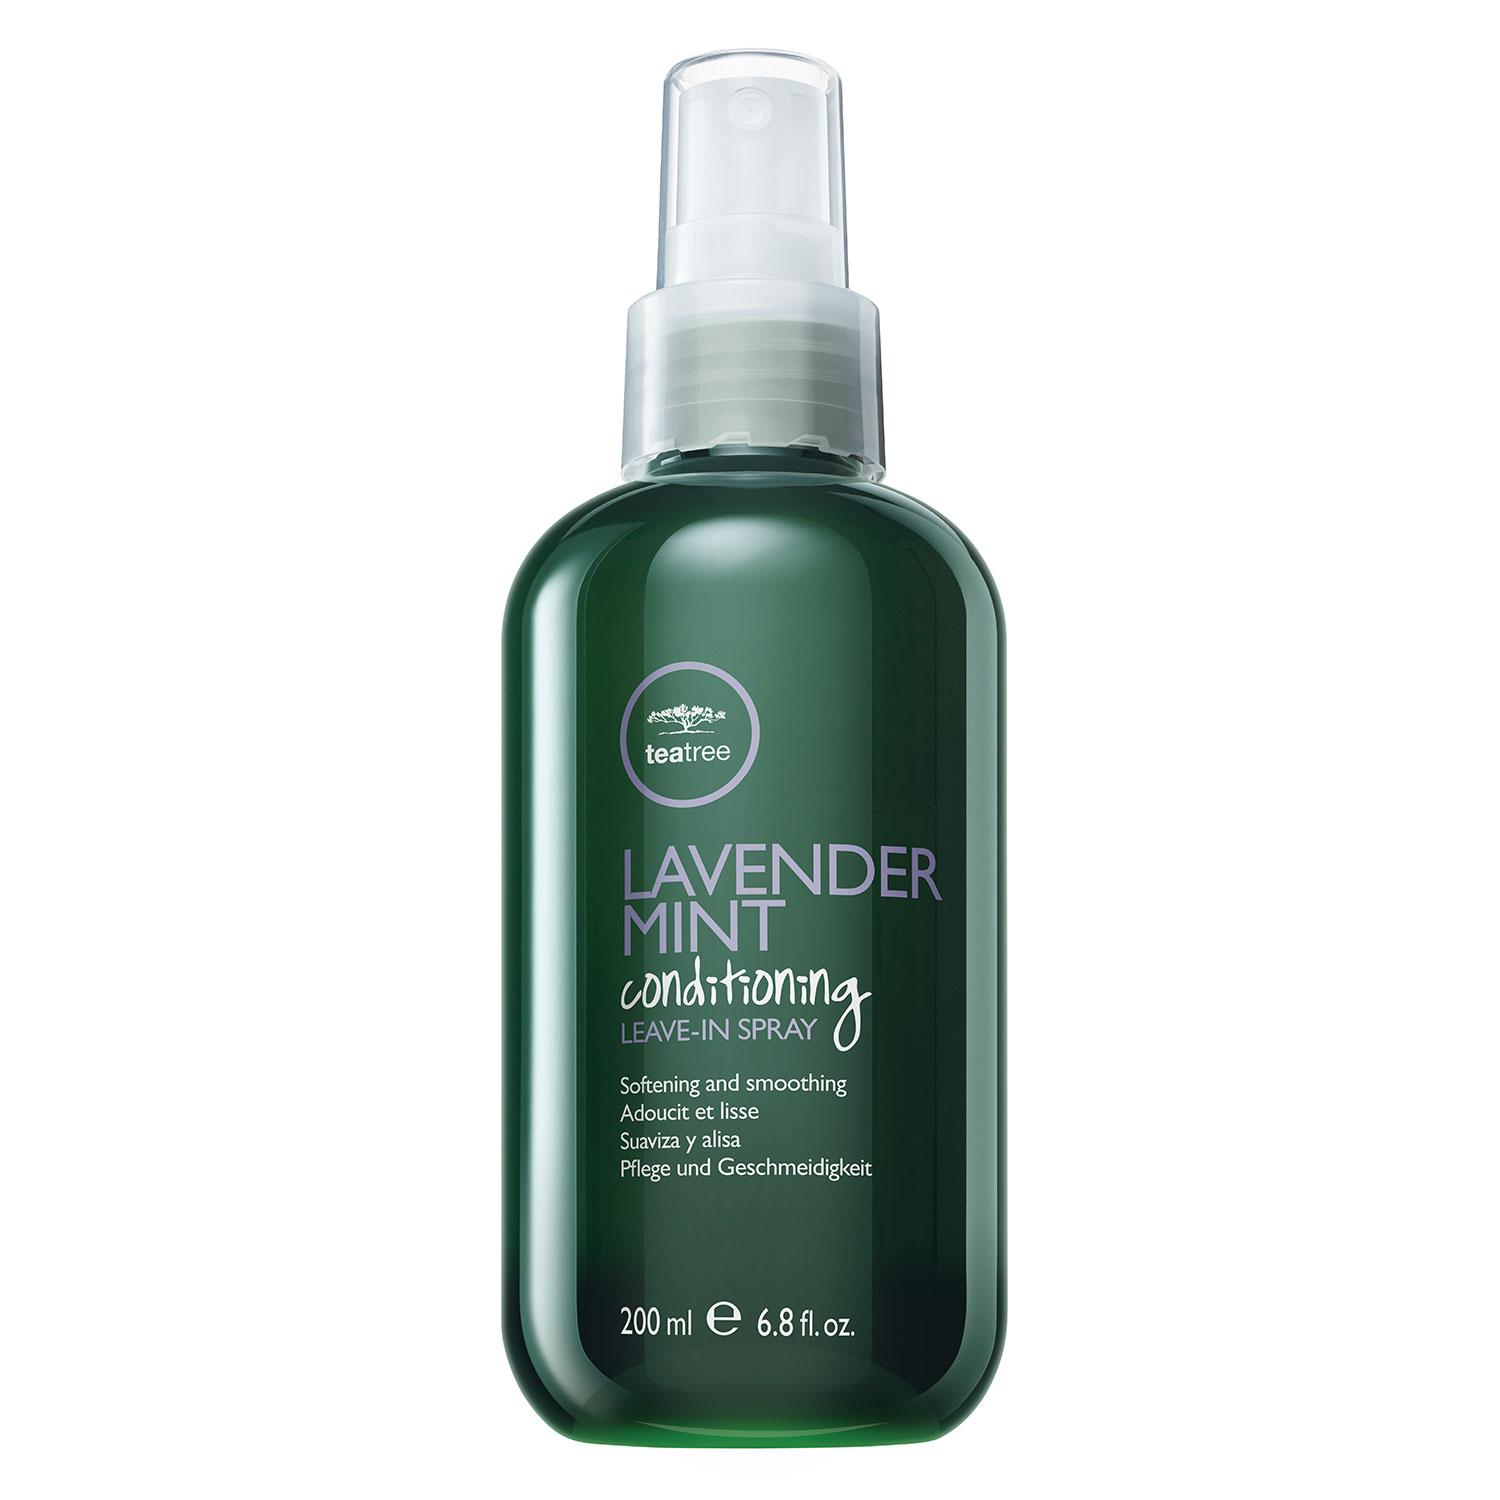 Tea Tree Lavender Mint - Conditioning Leave-In Spray